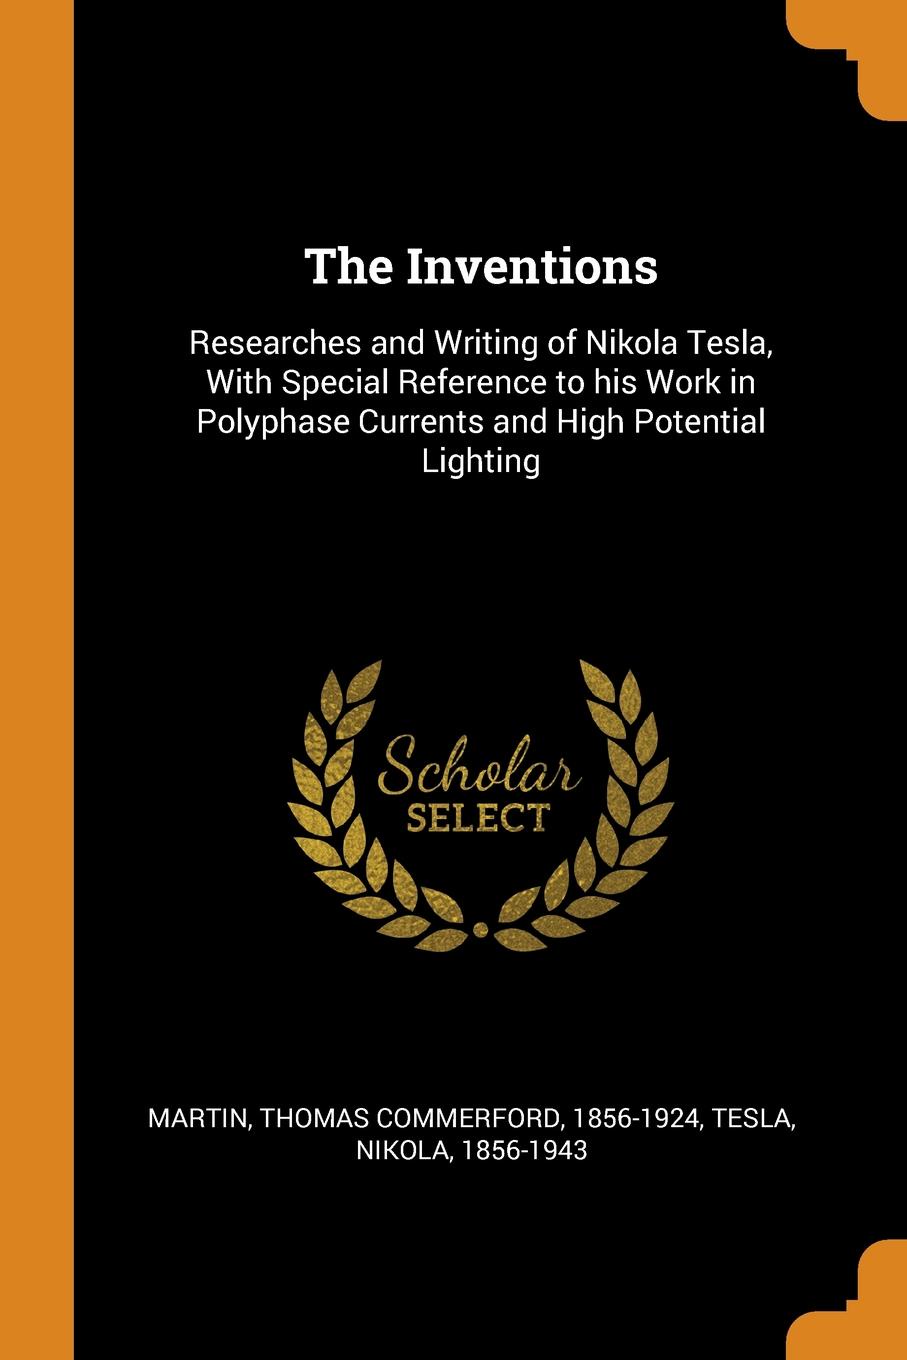 The Inventions. Researches and Writing of Nikola Tesla, With Special Reference to his Work in Polyphase Currents and High Potential Lighting